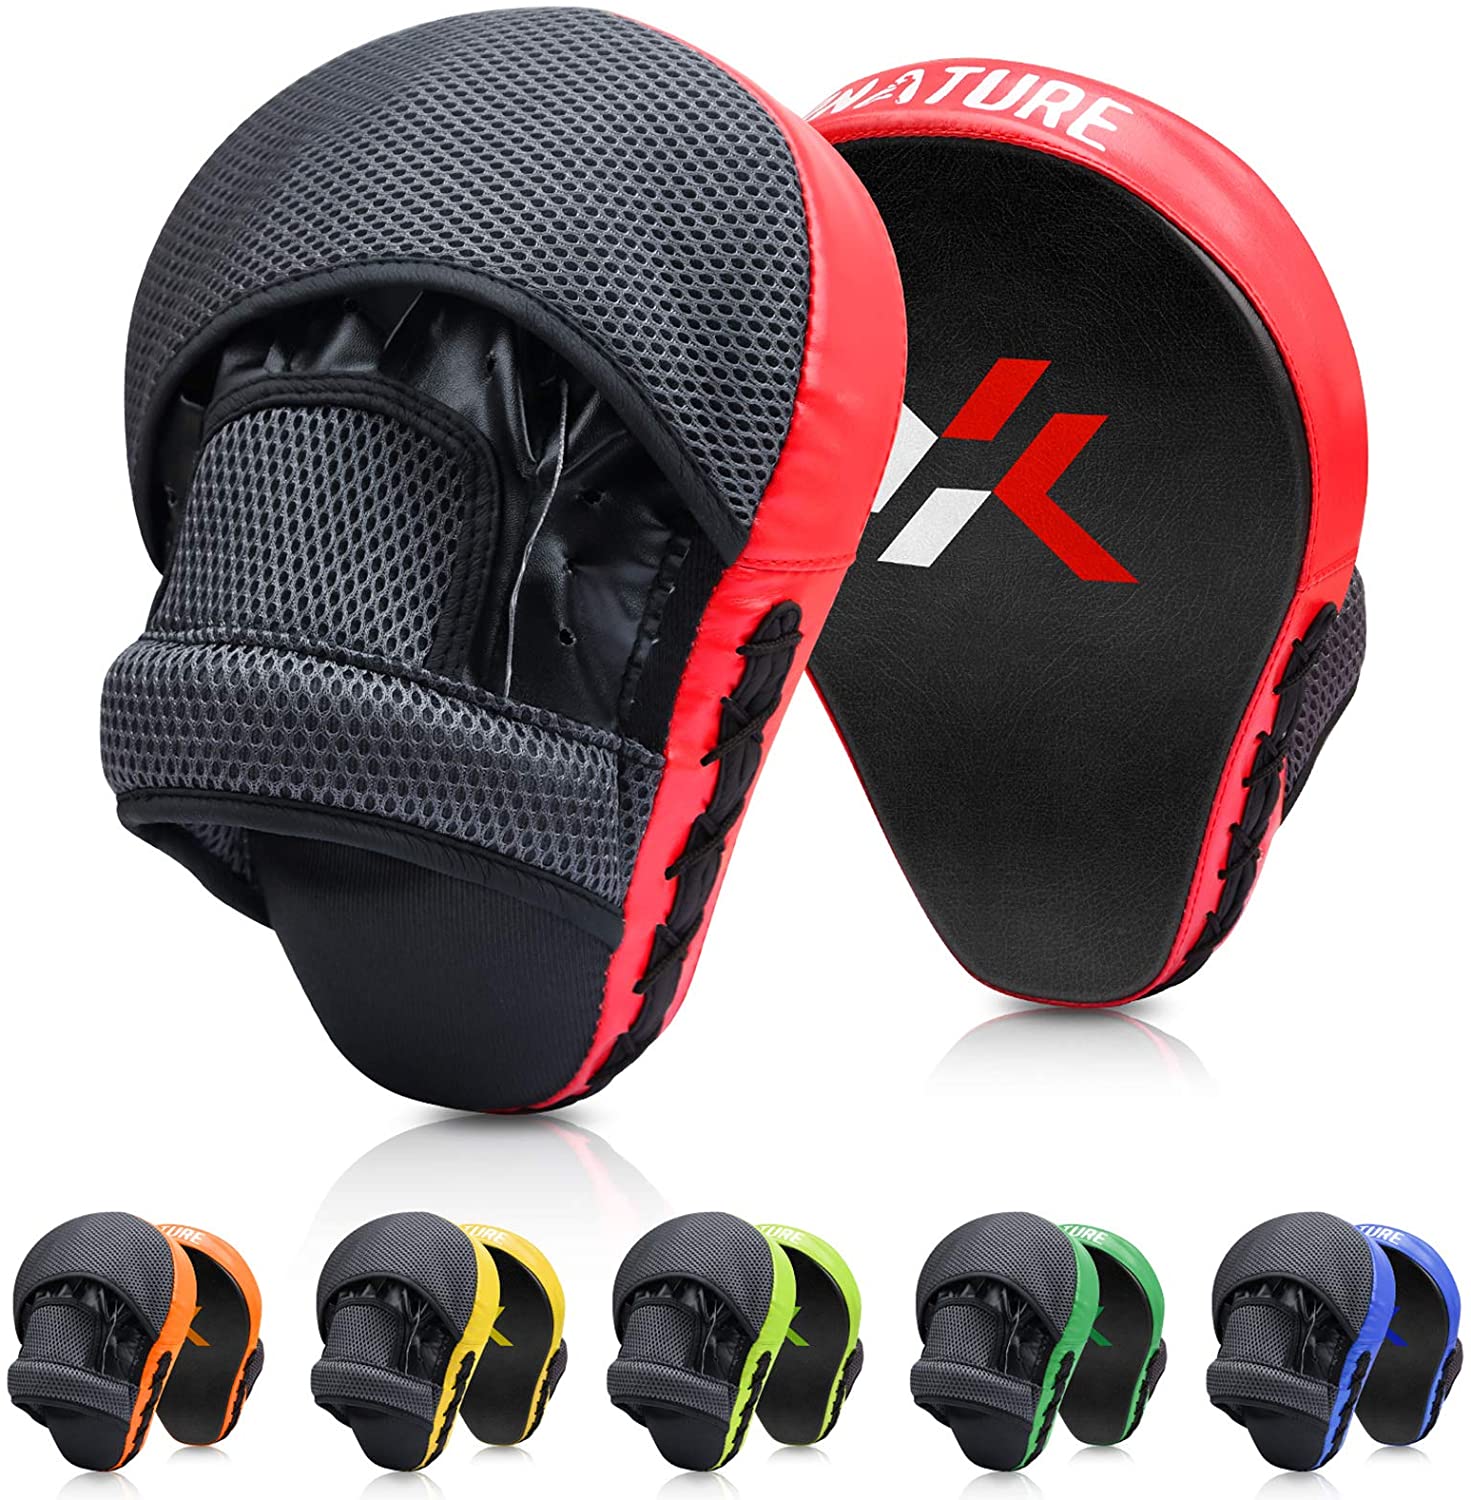 Xnature Breathable Mesh Ventilation Boxing Mitts